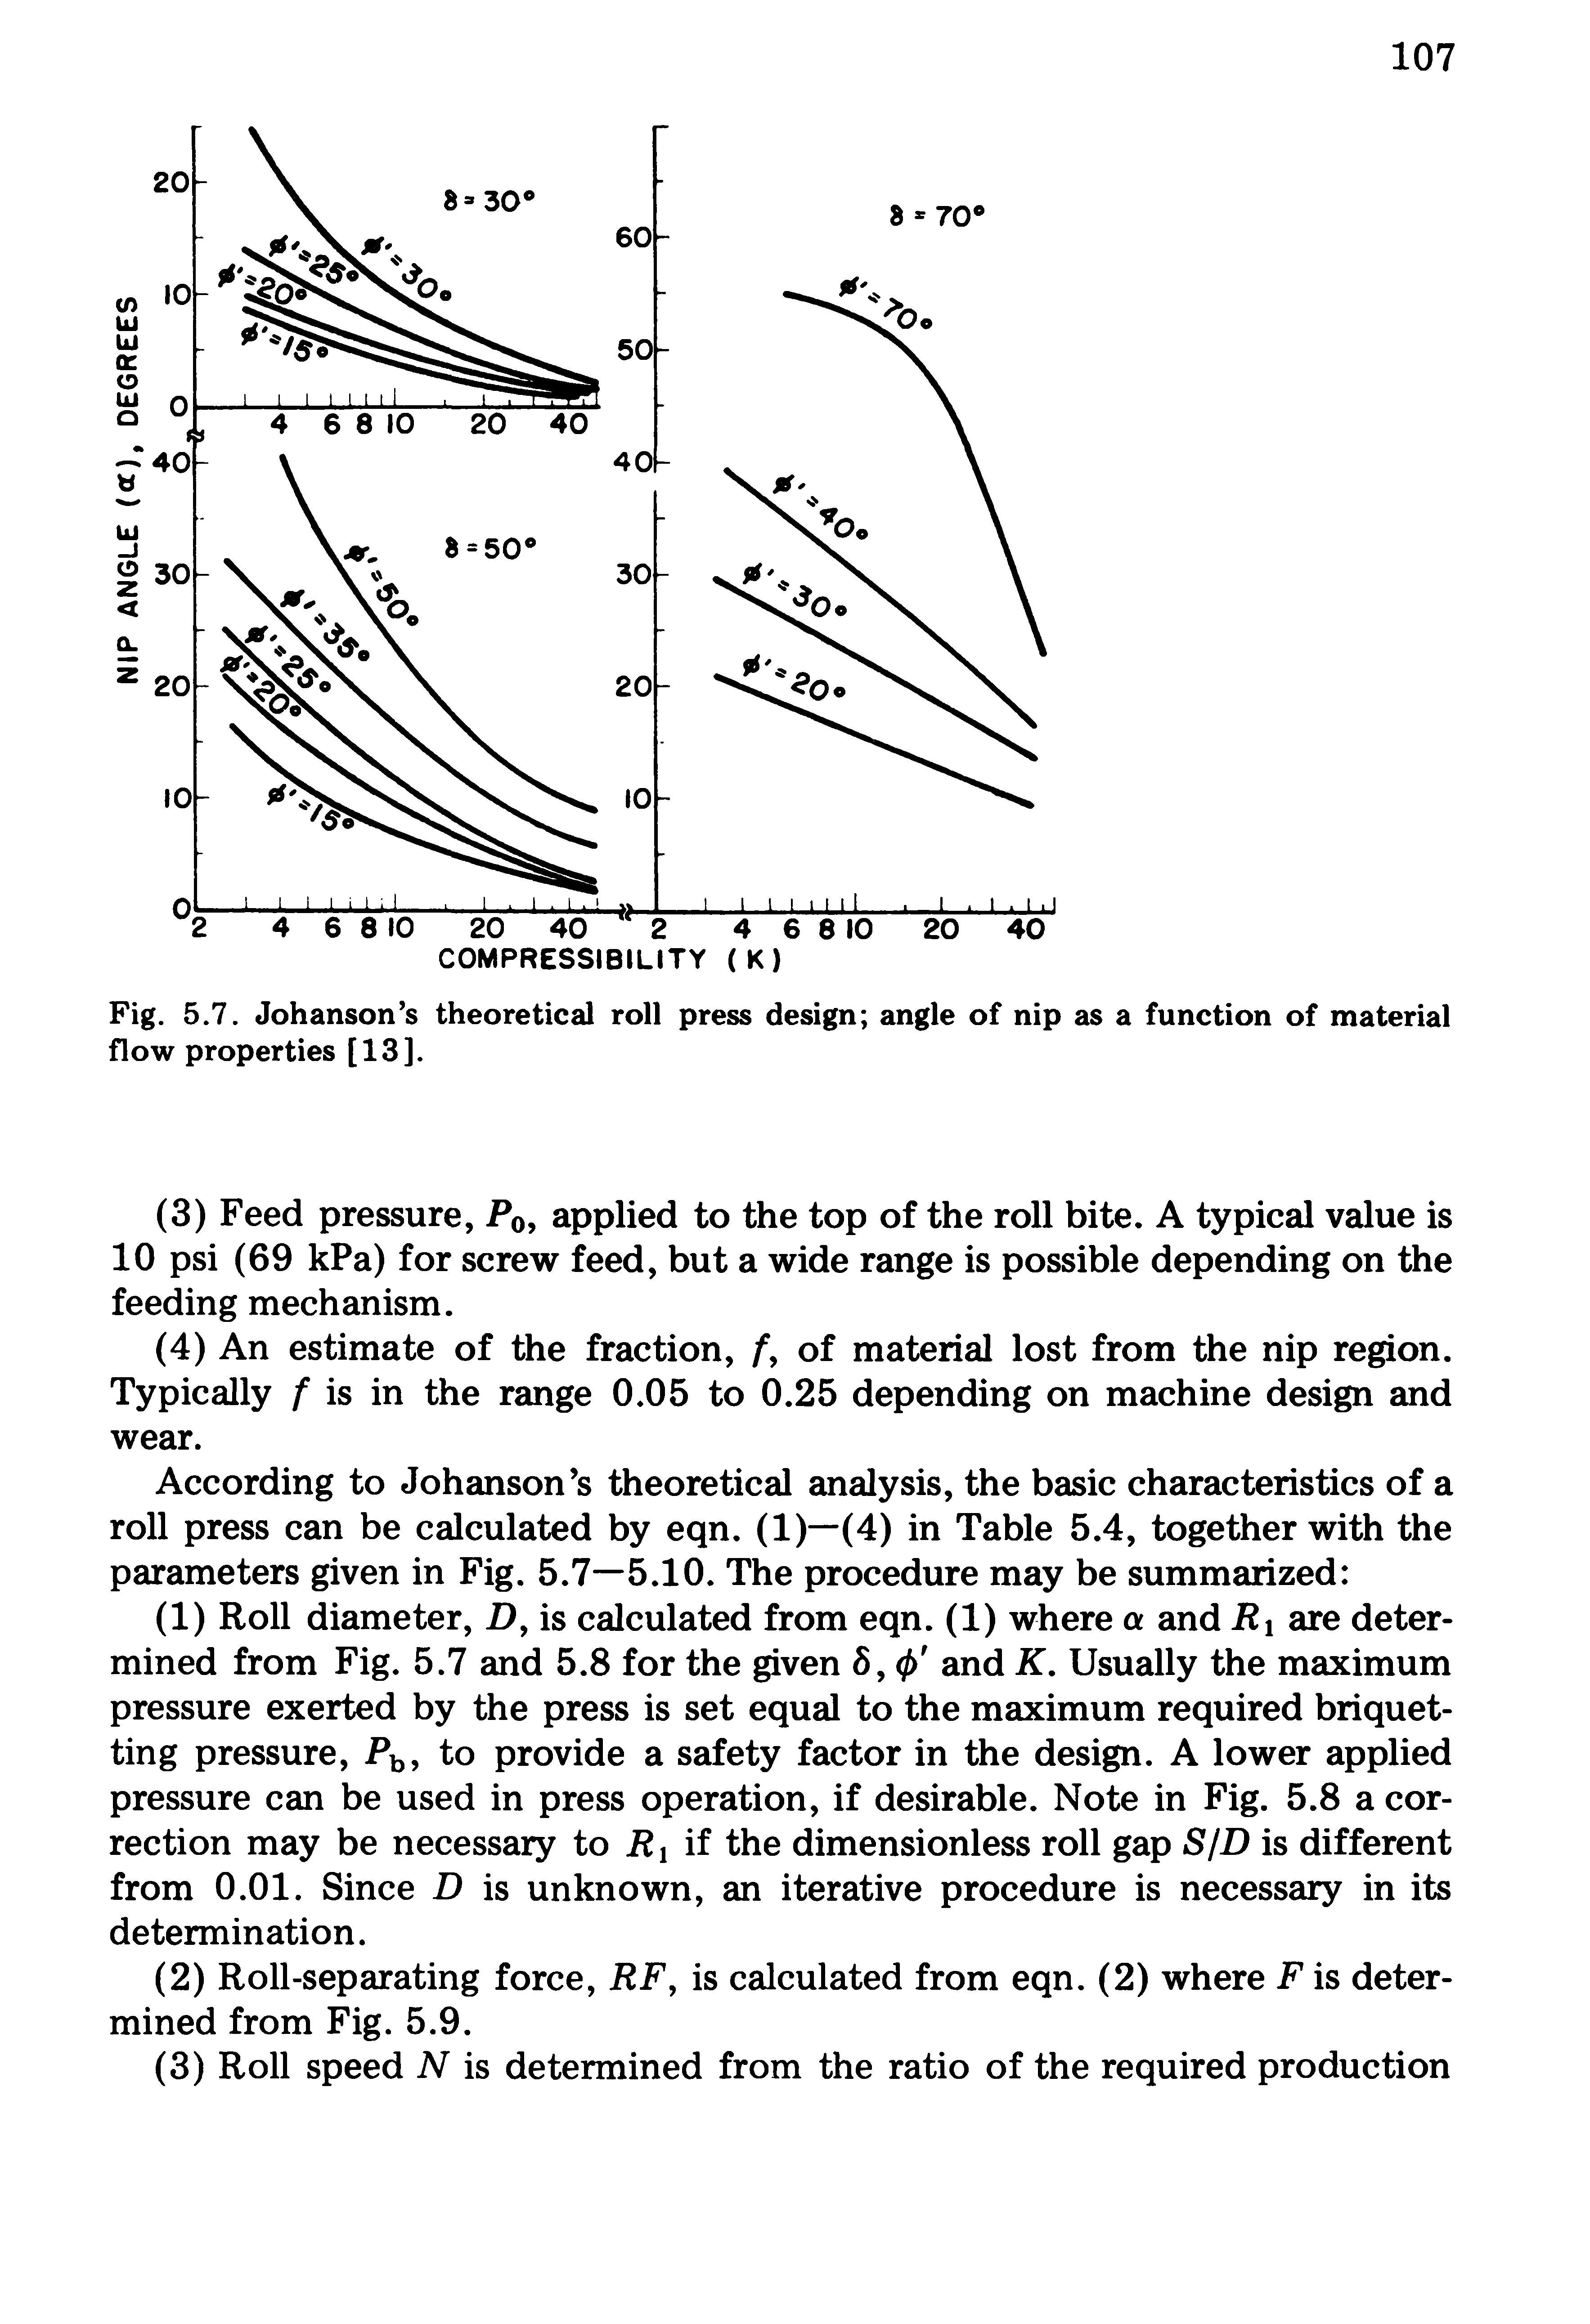 Fig. 5.7. Johanson s theoretical roll press design angle of nip as a function of material flow properties [13].